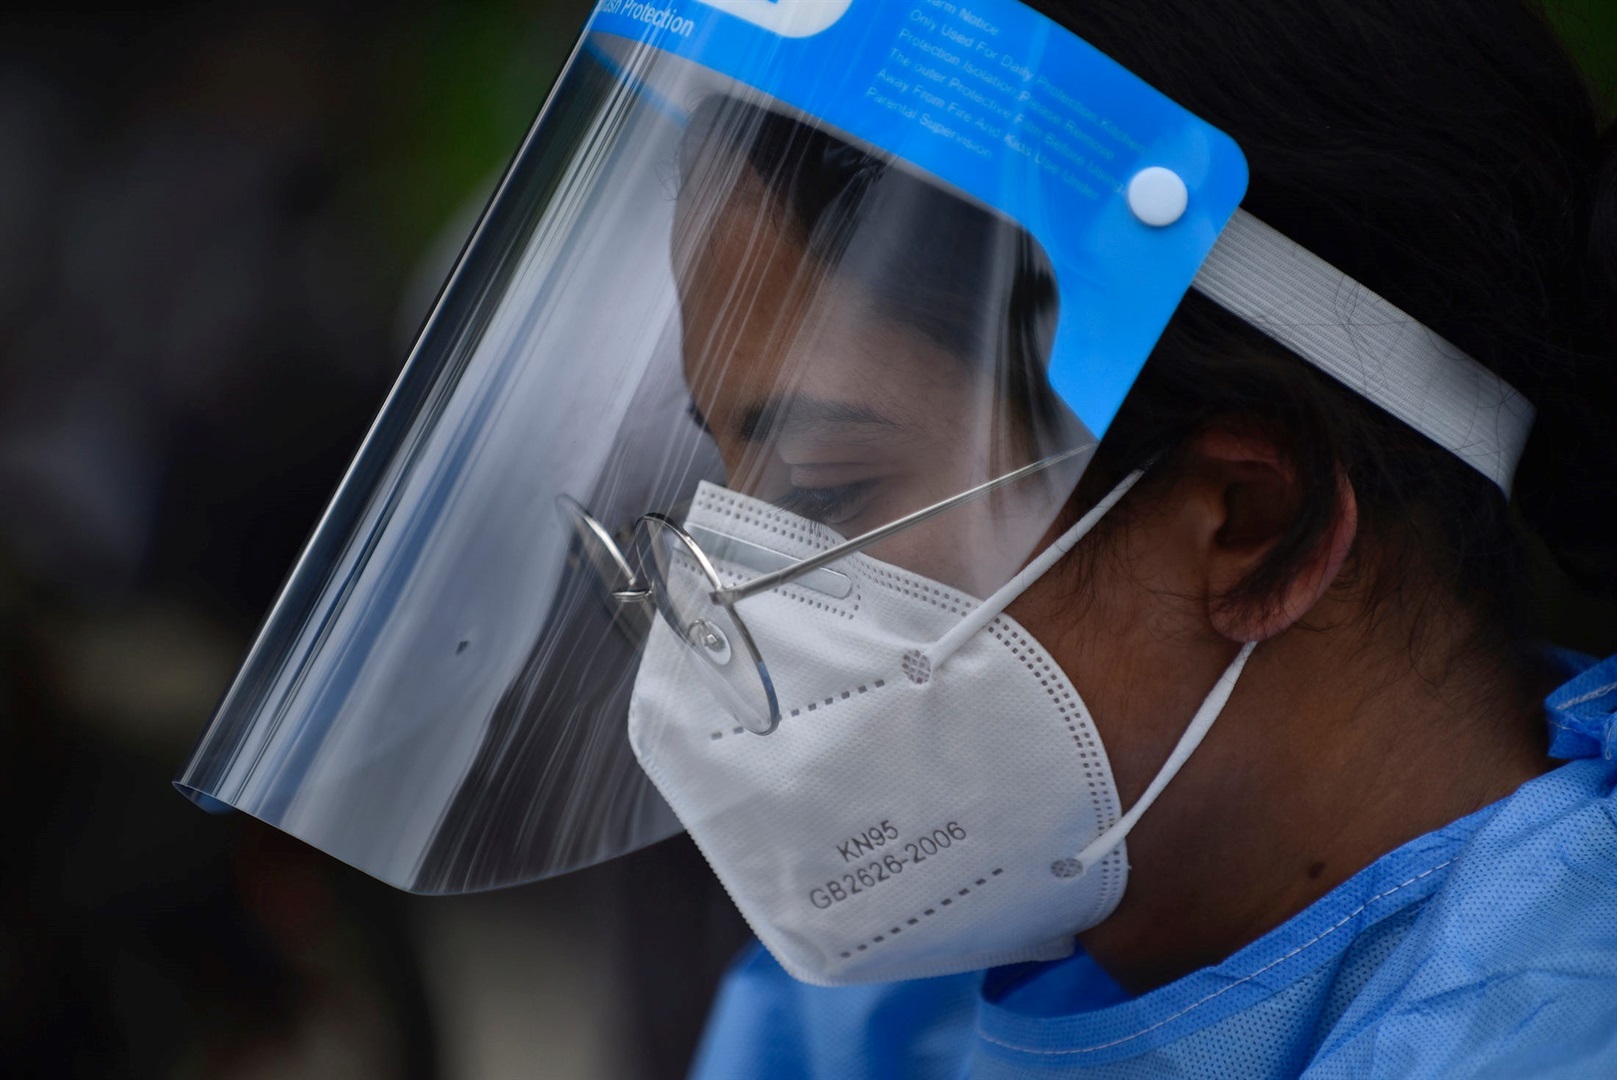 A Nepalese health worker in protective gear, ready to collect swab samples to test them for the coronavirus in Singh Durbar, Kathmandu, Nepal on Wednesday, July 29, 2020.
